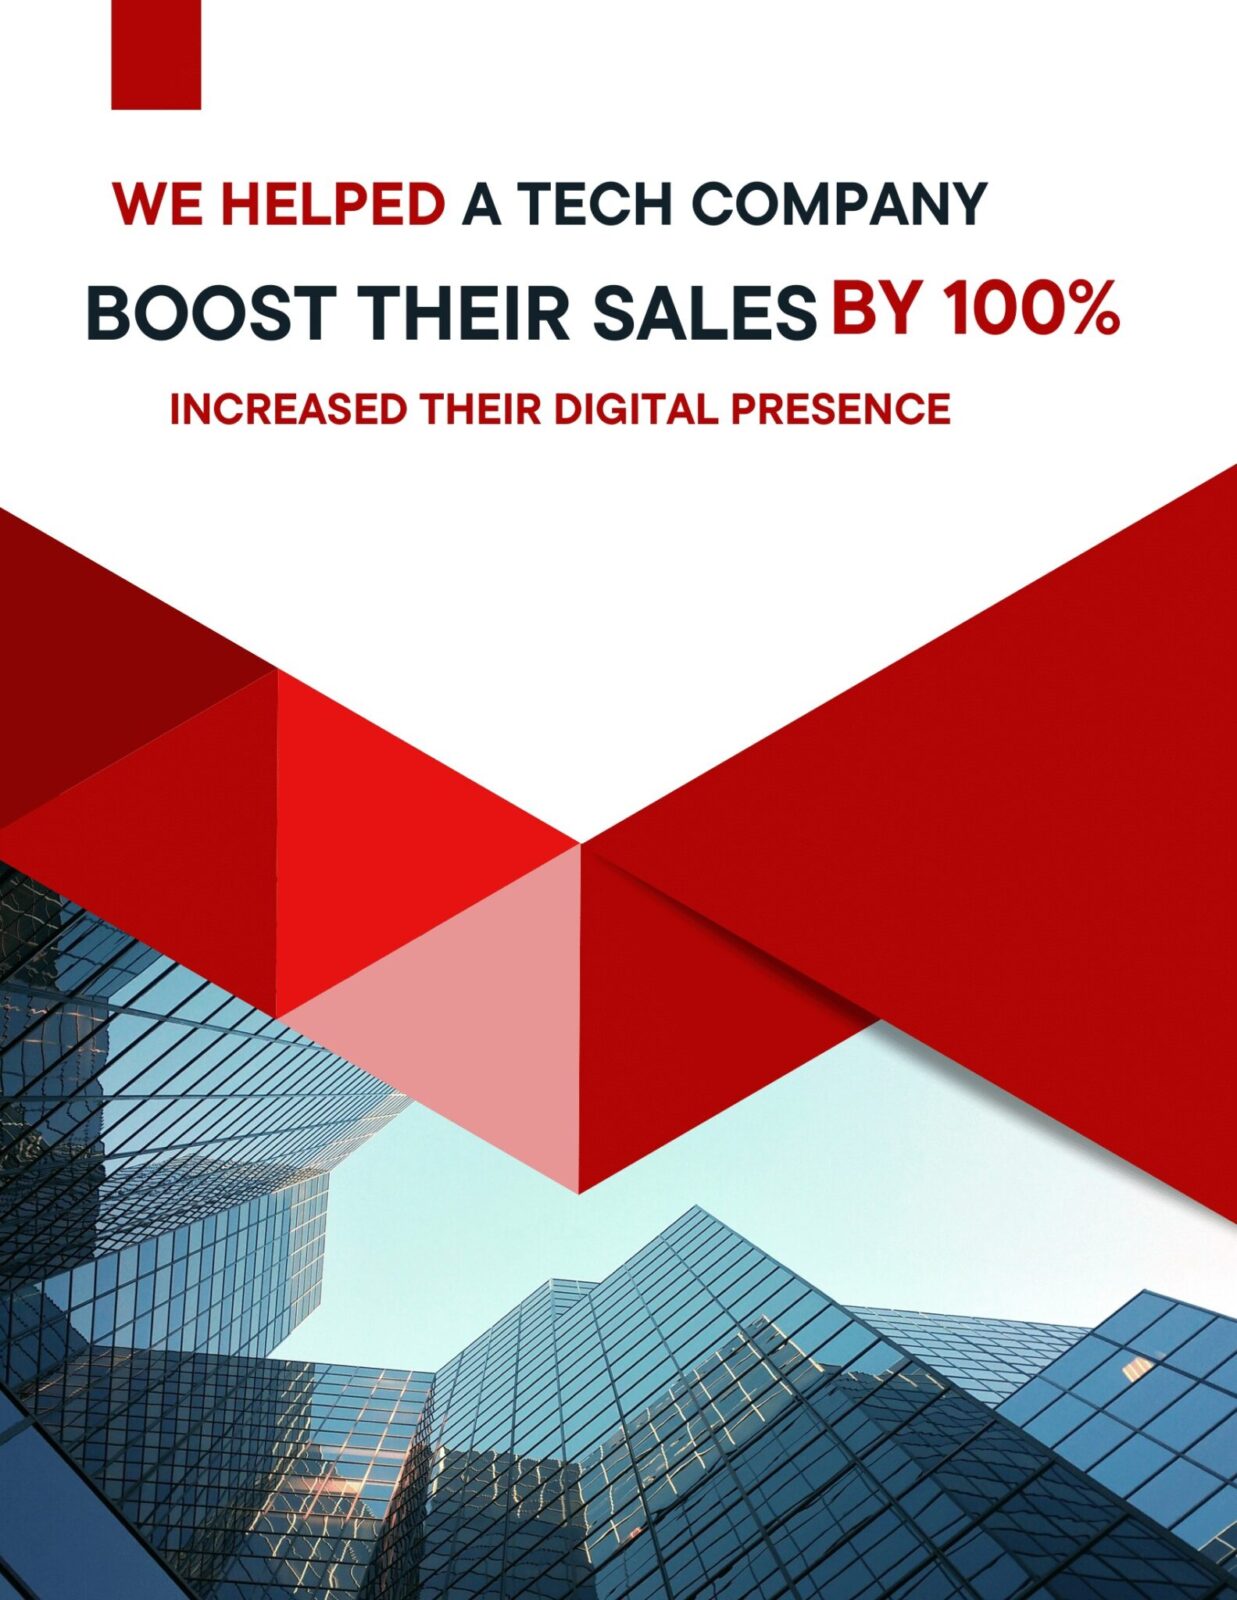 We Helped A Technology Company Increase Their Sales By 100%